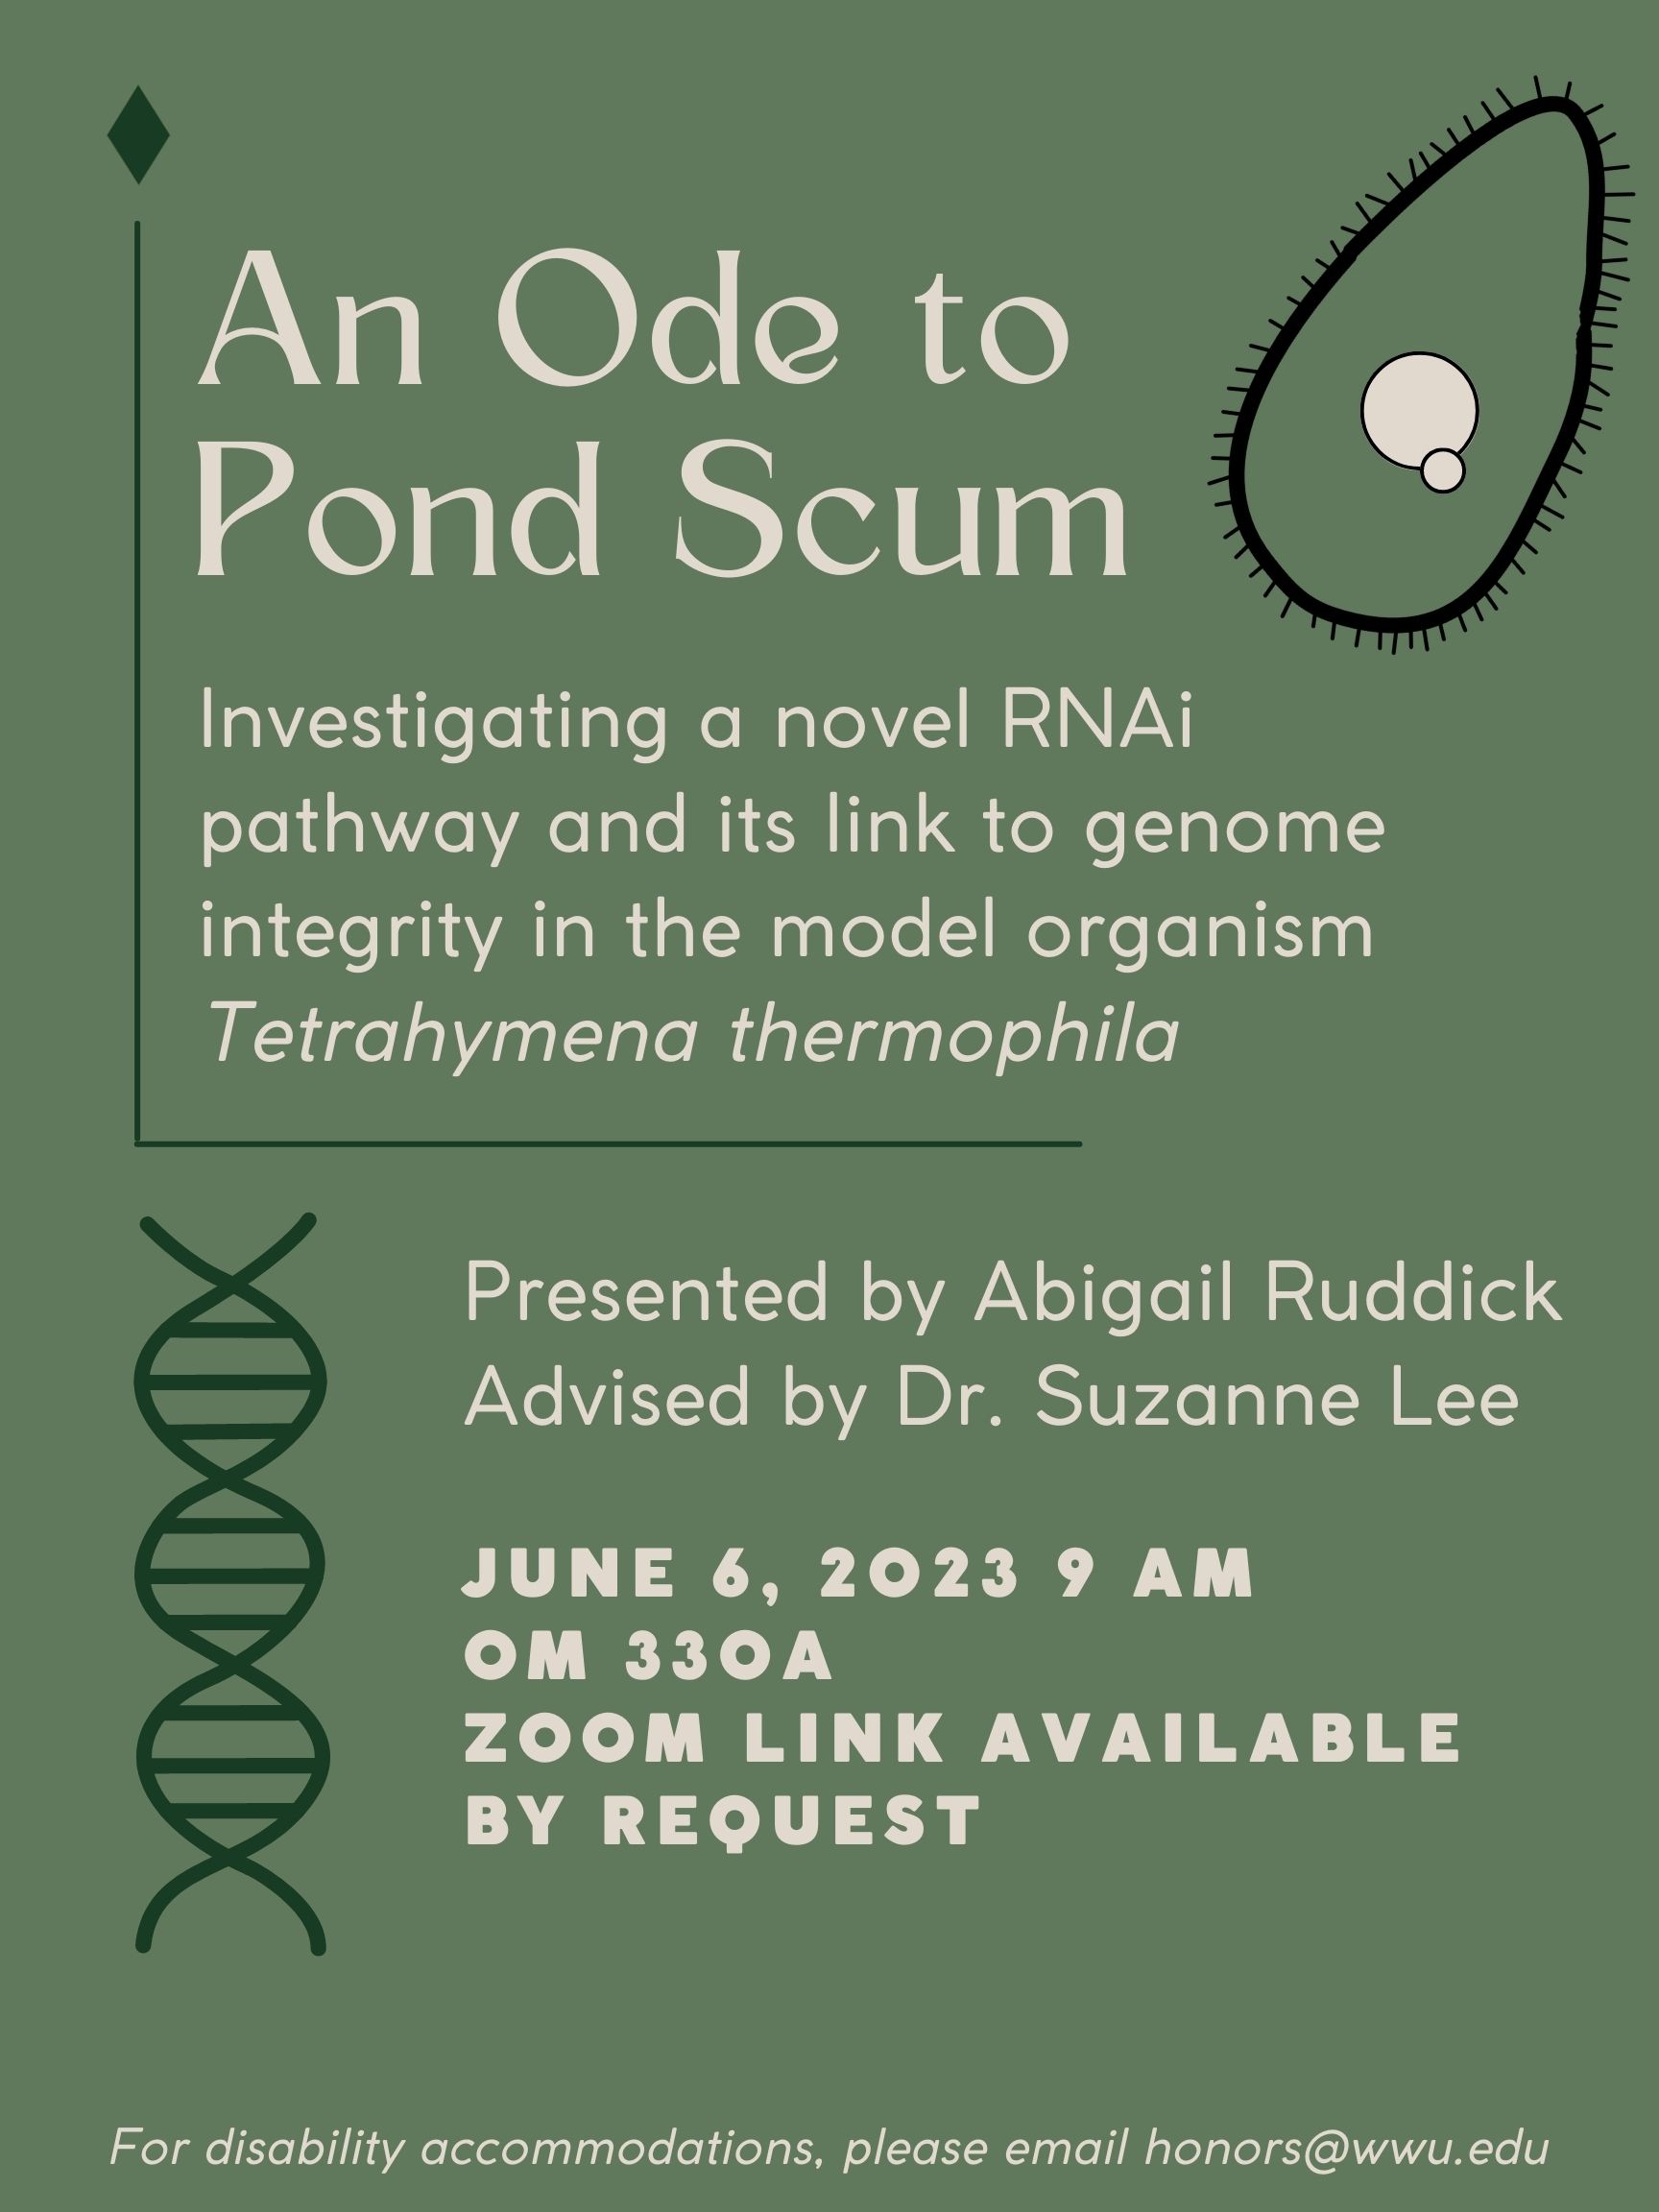 A green poster with a drawing of Tetrahymena thermophila and a DNA double helix. Text reads: "An Ode to Pond Scum – Investigating a novel RNAi pathway and its link to genome integrity in the model organism Tetrahymena thermophila.’ Presented by Abigail Ruddick. Advised by Dr. Suzanne Lee. June 6, 2023 9 AM. Old Main 331. Zoom link available by request. For disability accommodations, please email honors@wwu.edu."